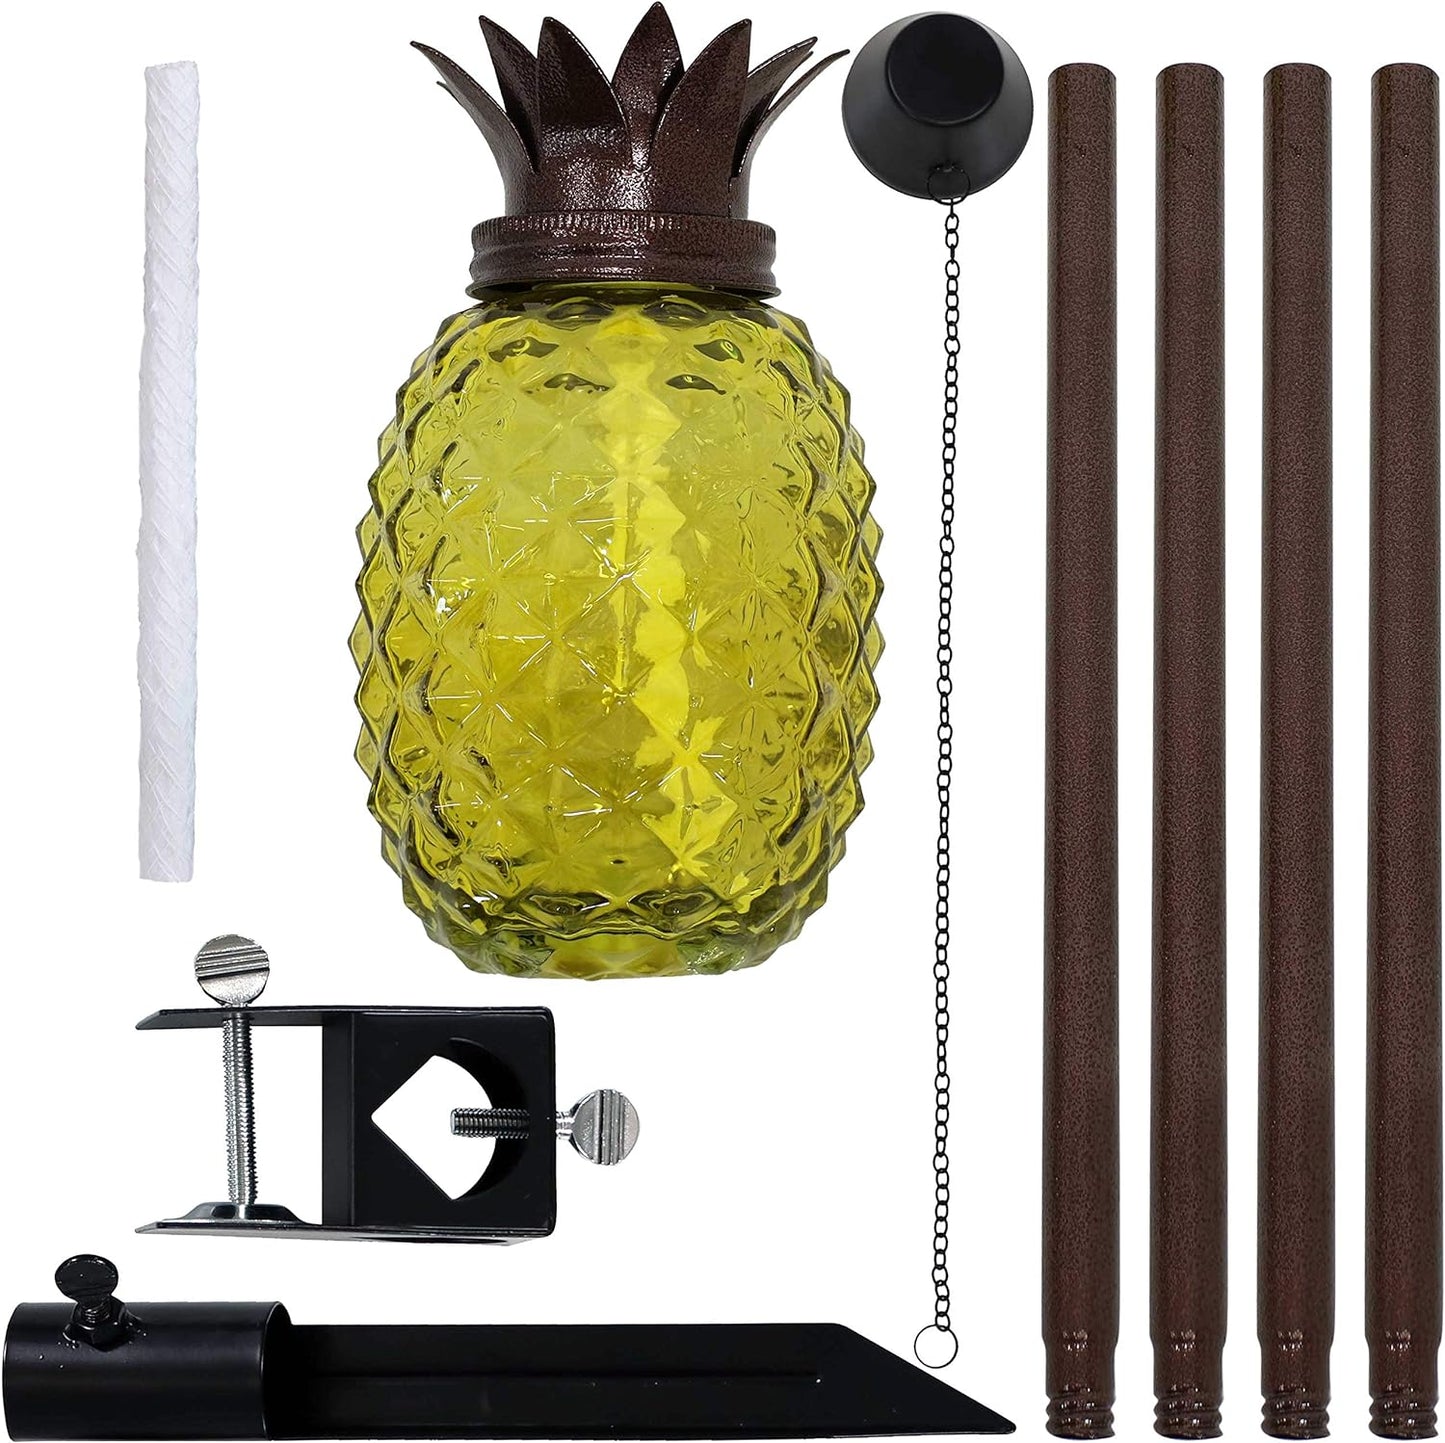 Tropical Pineapple 3-In-1 Glass Patio Torches - 23- to 63-Inch Adjustable Height - Set of 2 - Yellow